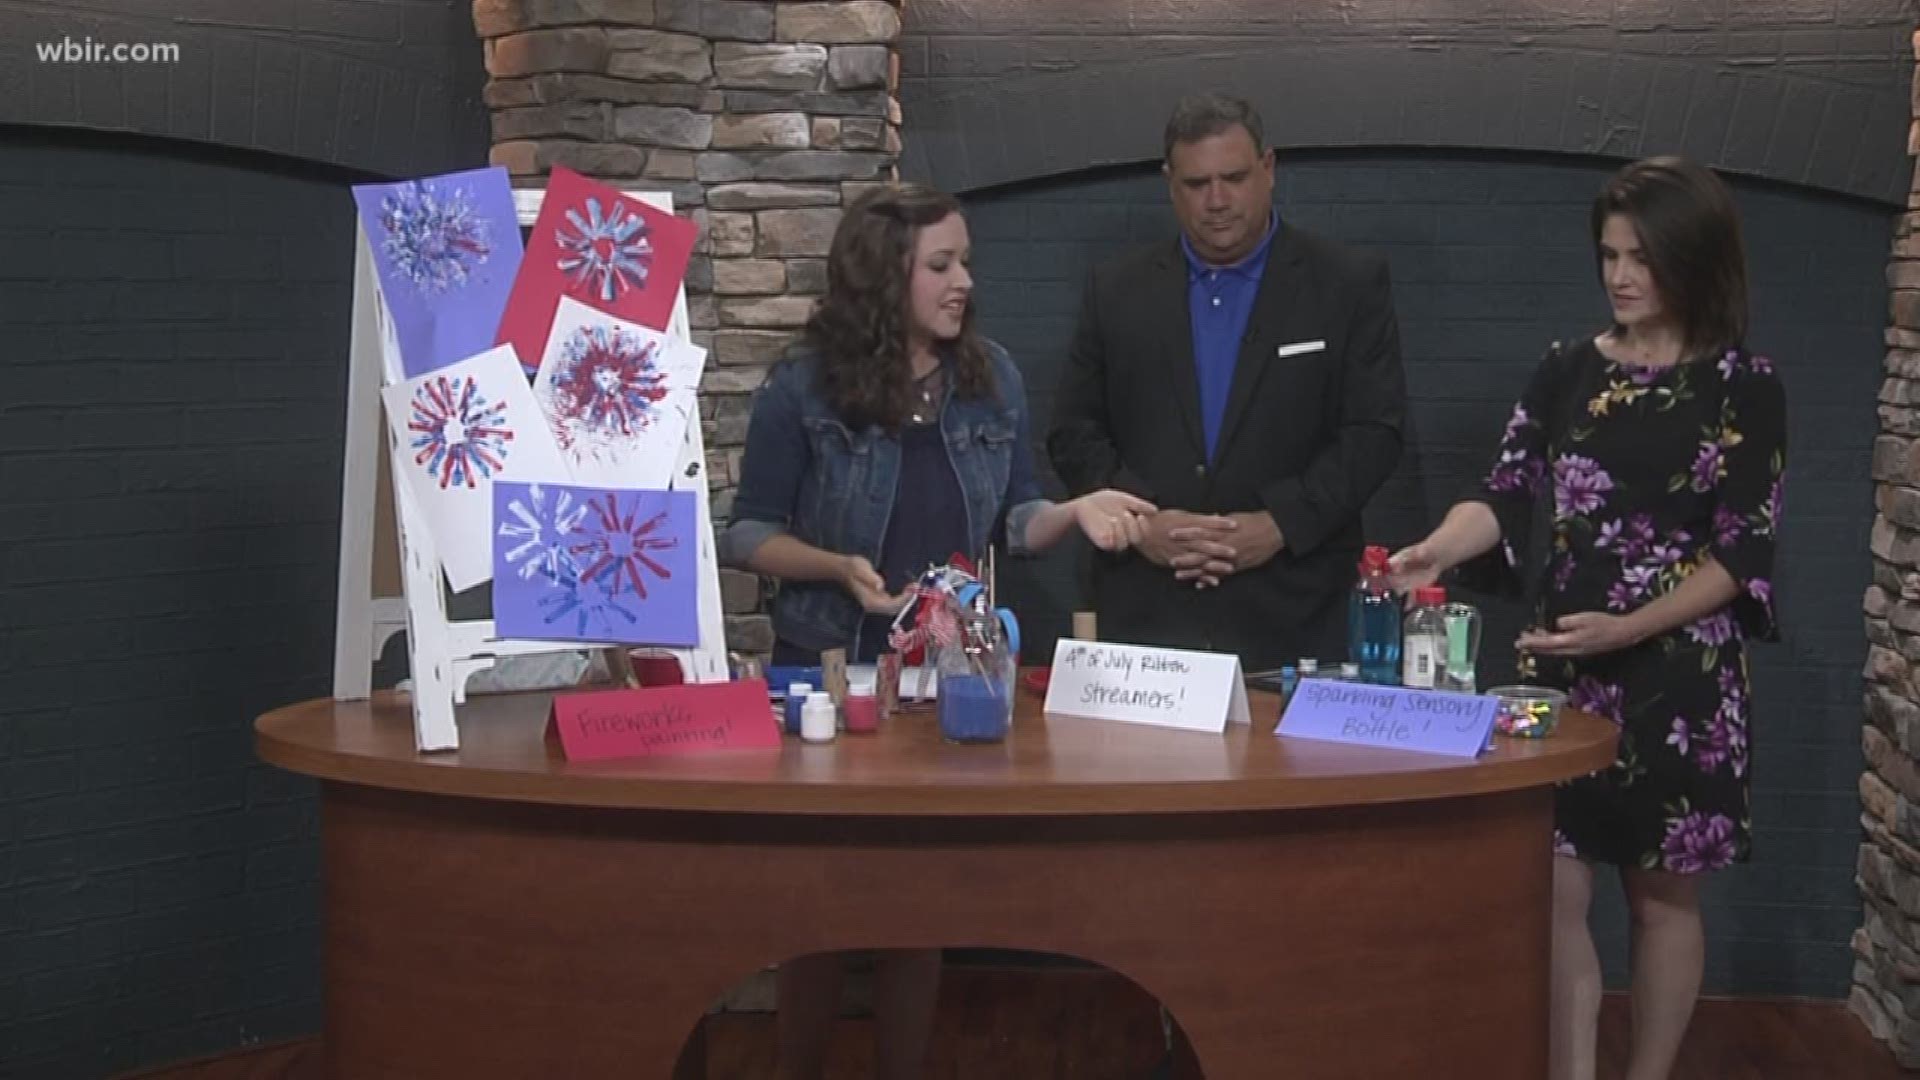 Looking for some fun crafts to do with the kids during the Fourth of July holiday? Chelsea Smith has some easy ideas to try including: Fireworks Painting and a sensory bottle. June 18, 2019-4pm .